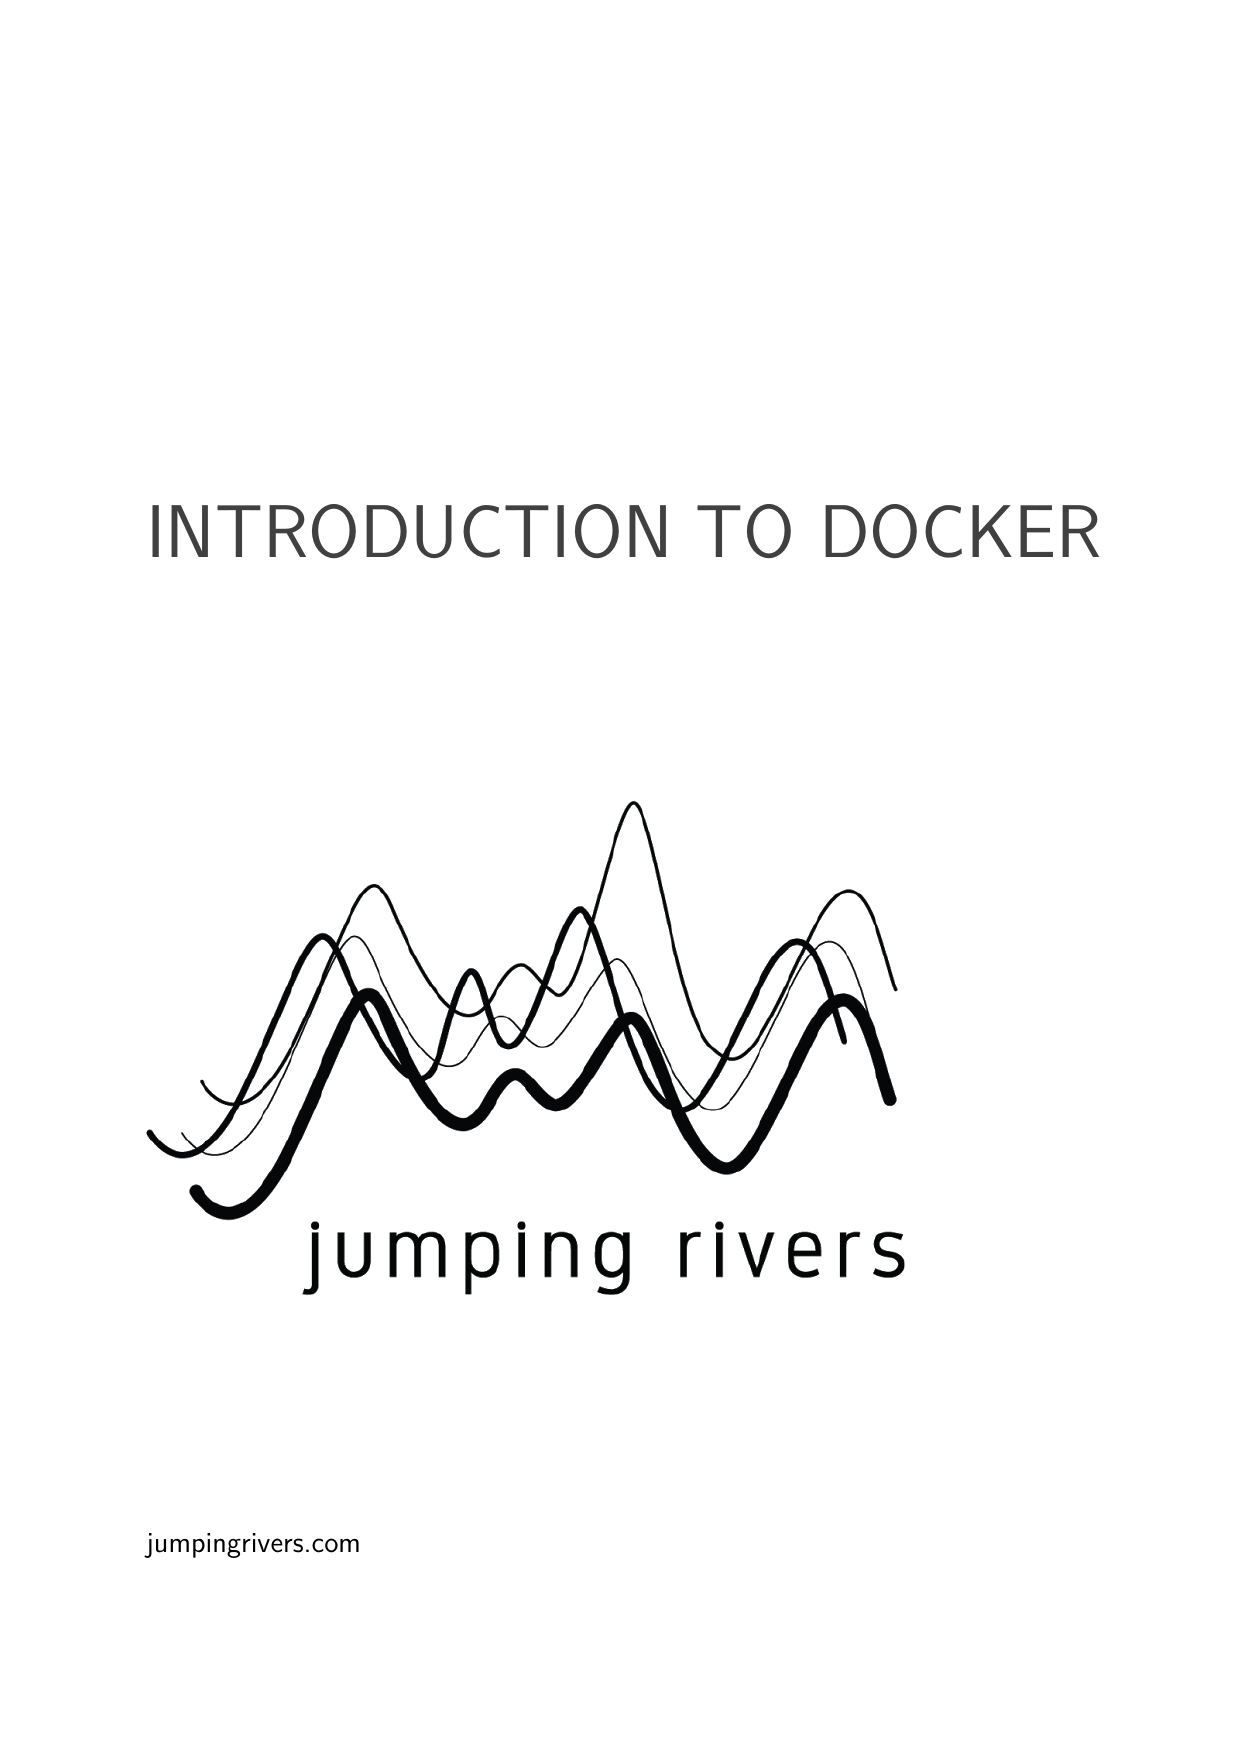 Example course material for 'Introduction to Docker